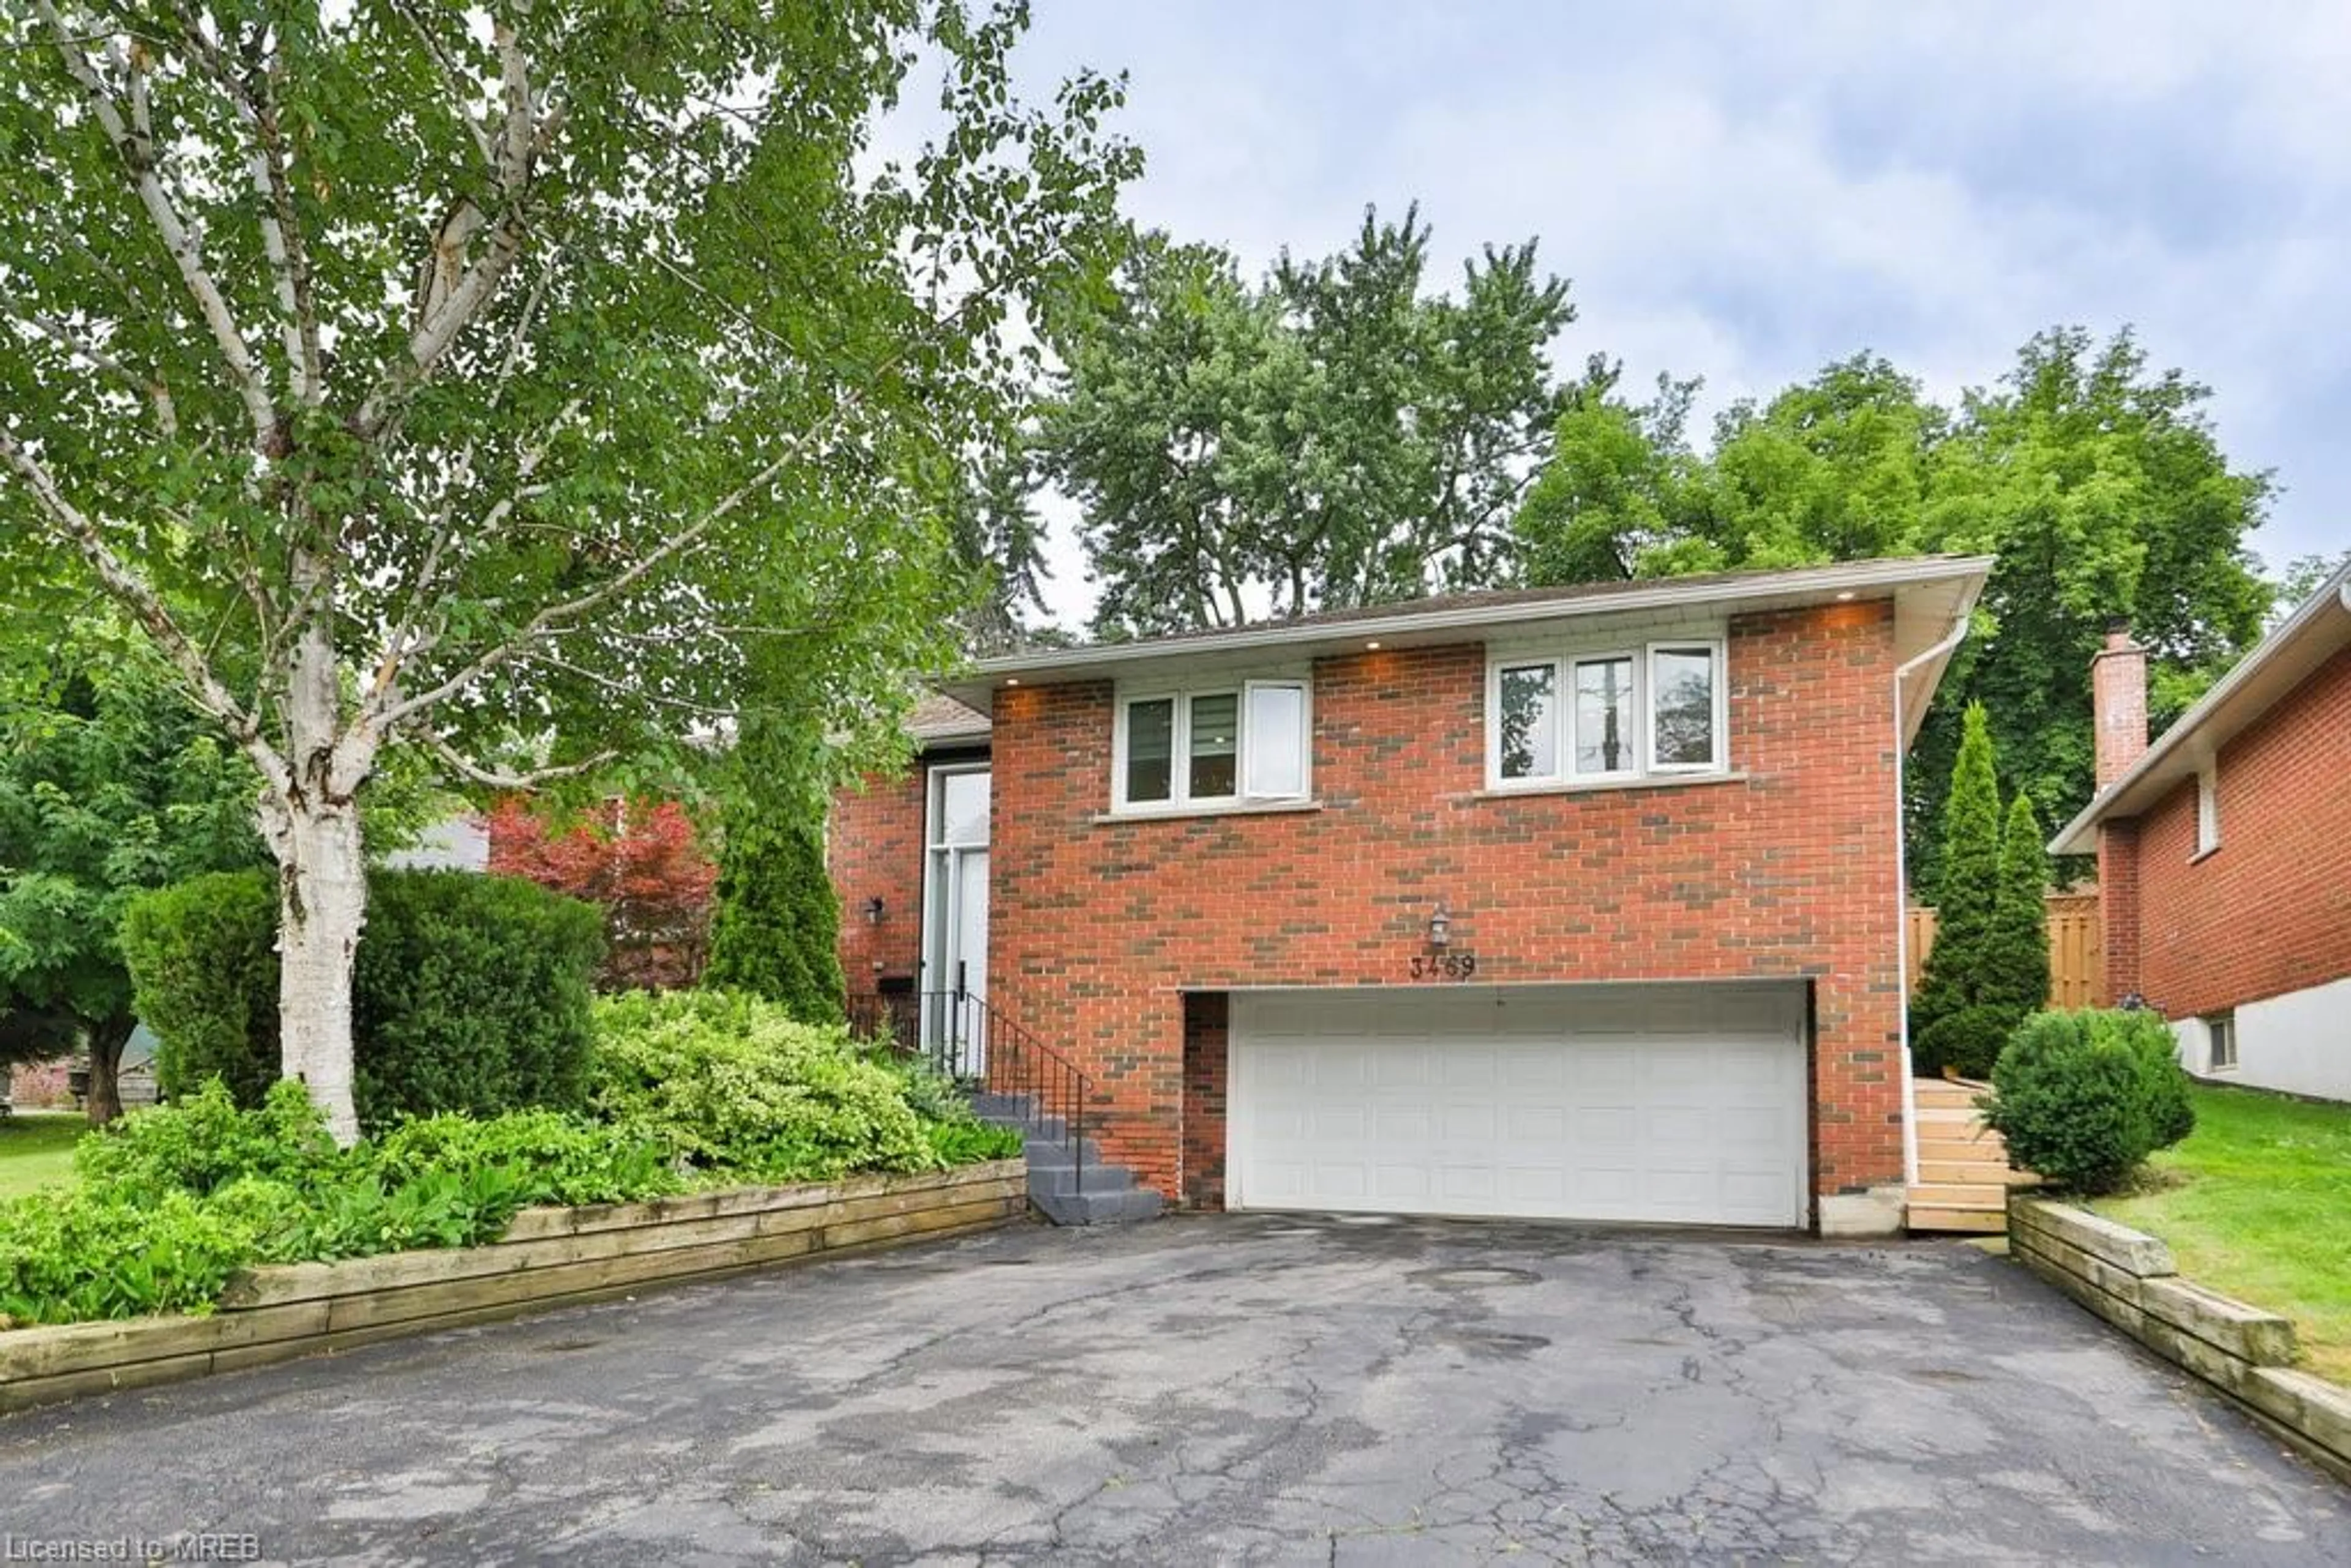 Home with brick exterior material for 3469 Credit Heights Dr, Mississauga Ontario L5C 2M2